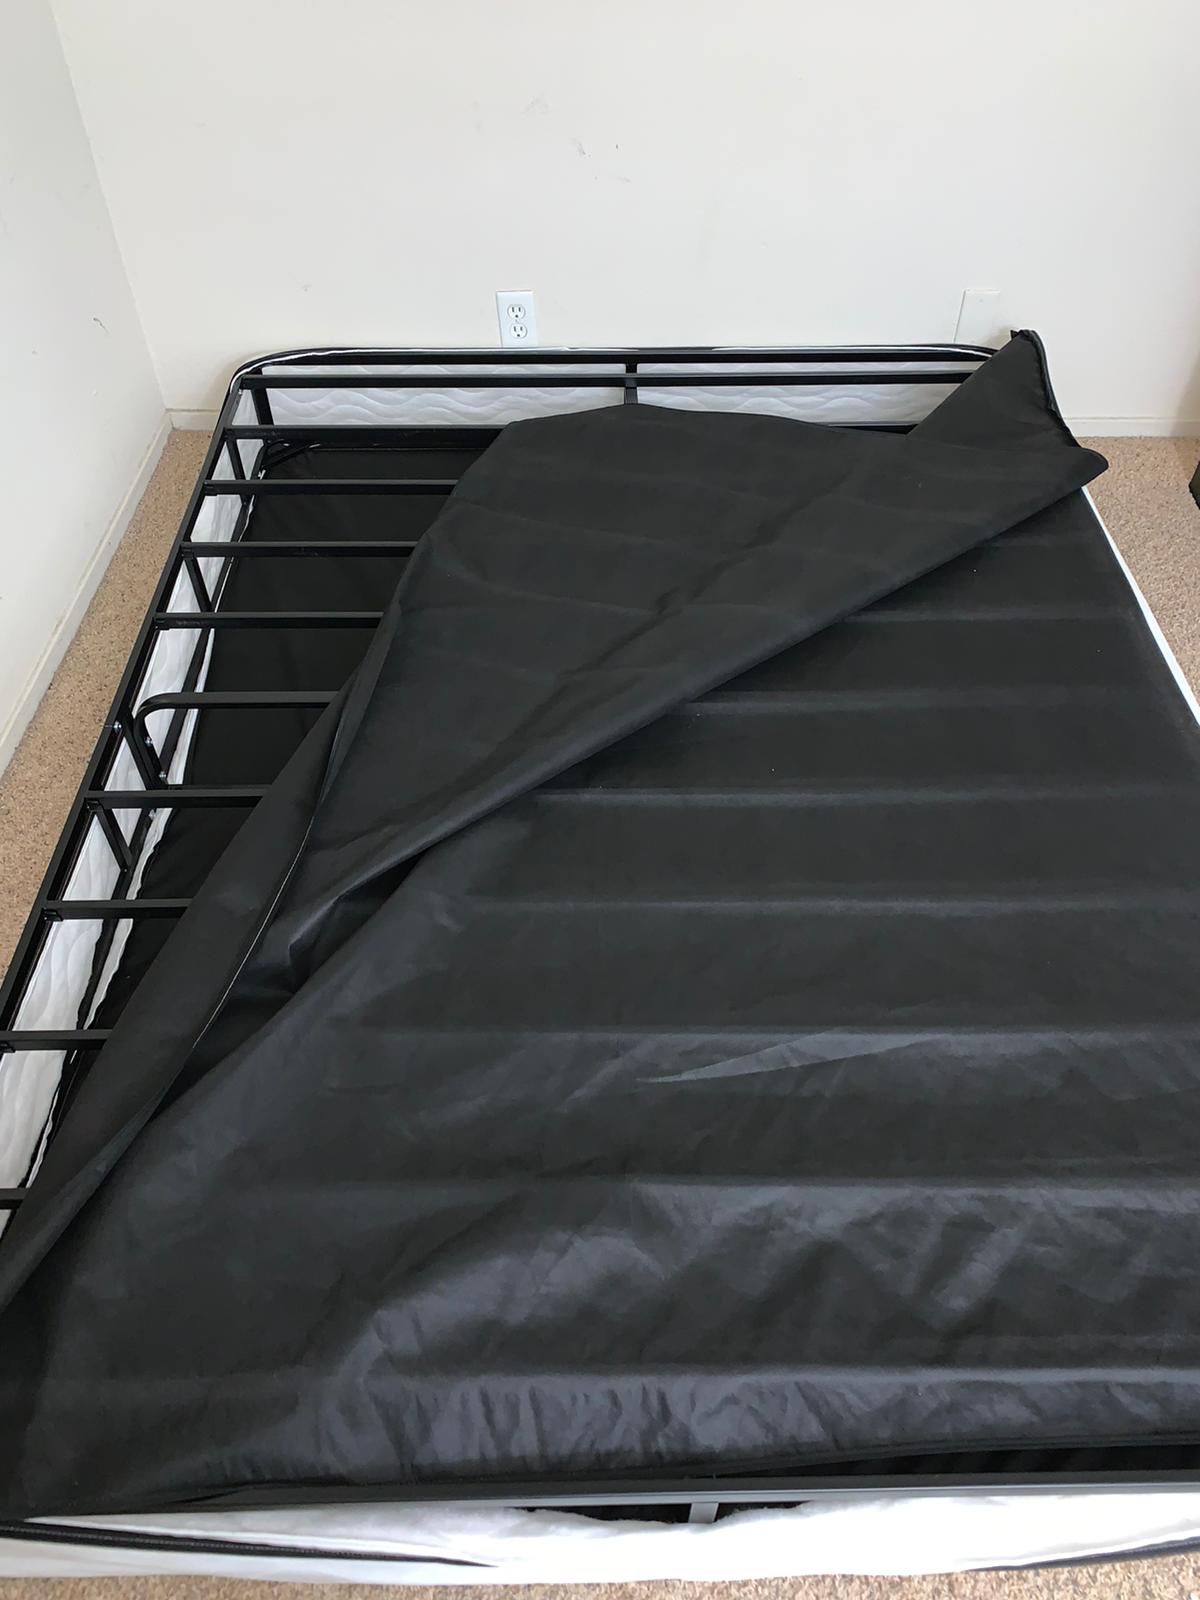 Bed frame very good condition, recently bought